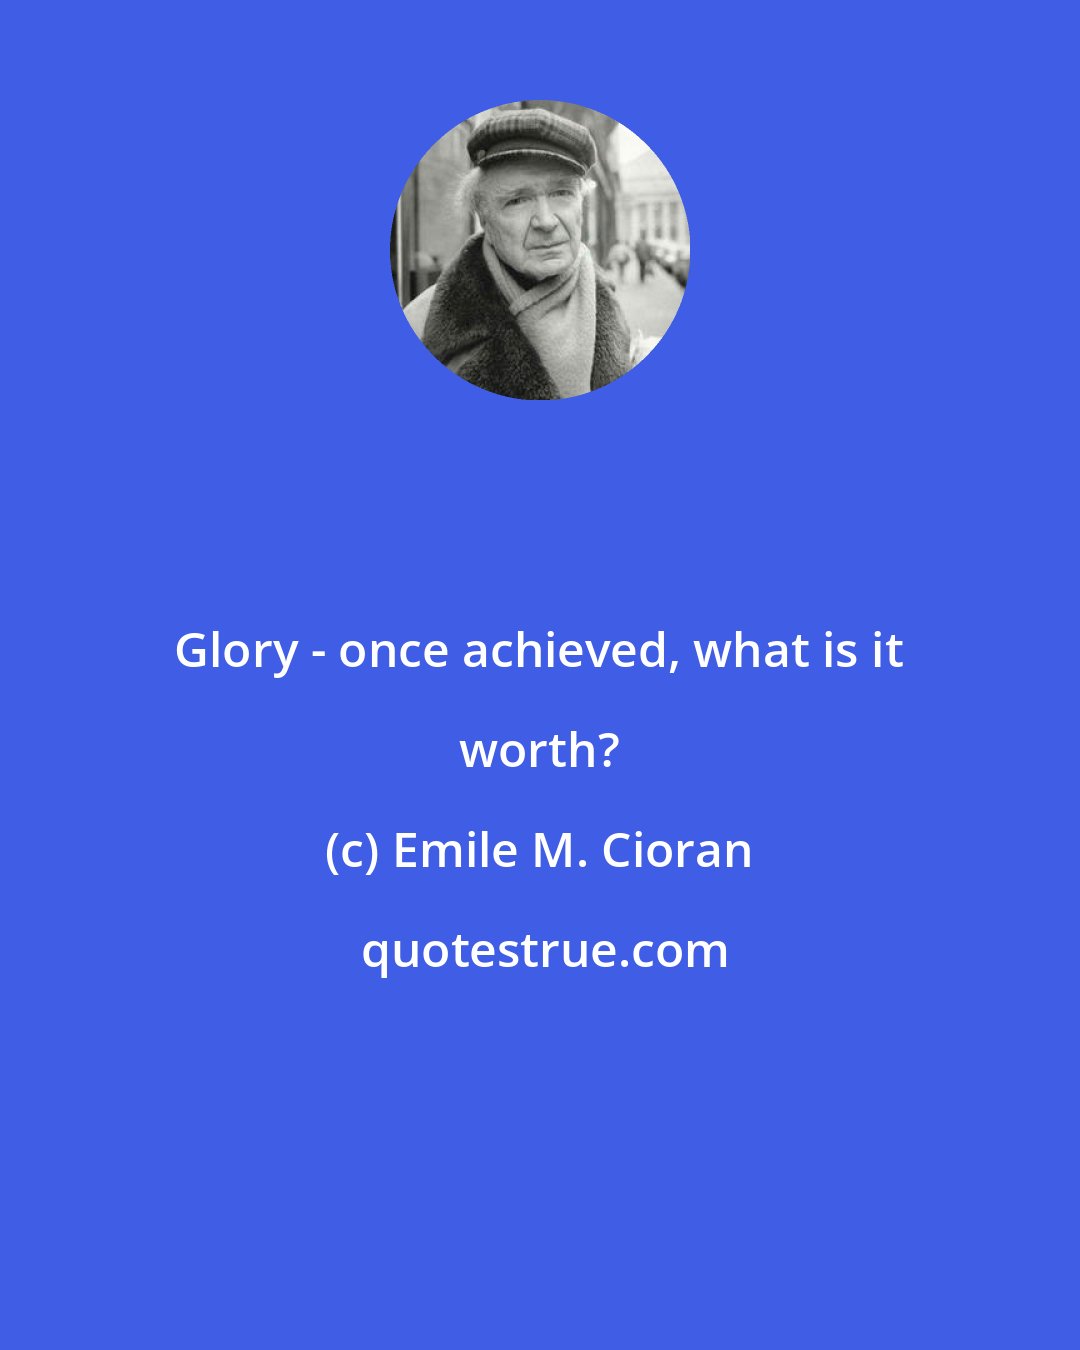 Emile M. Cioran: Glory - once achieved, what is it worth?